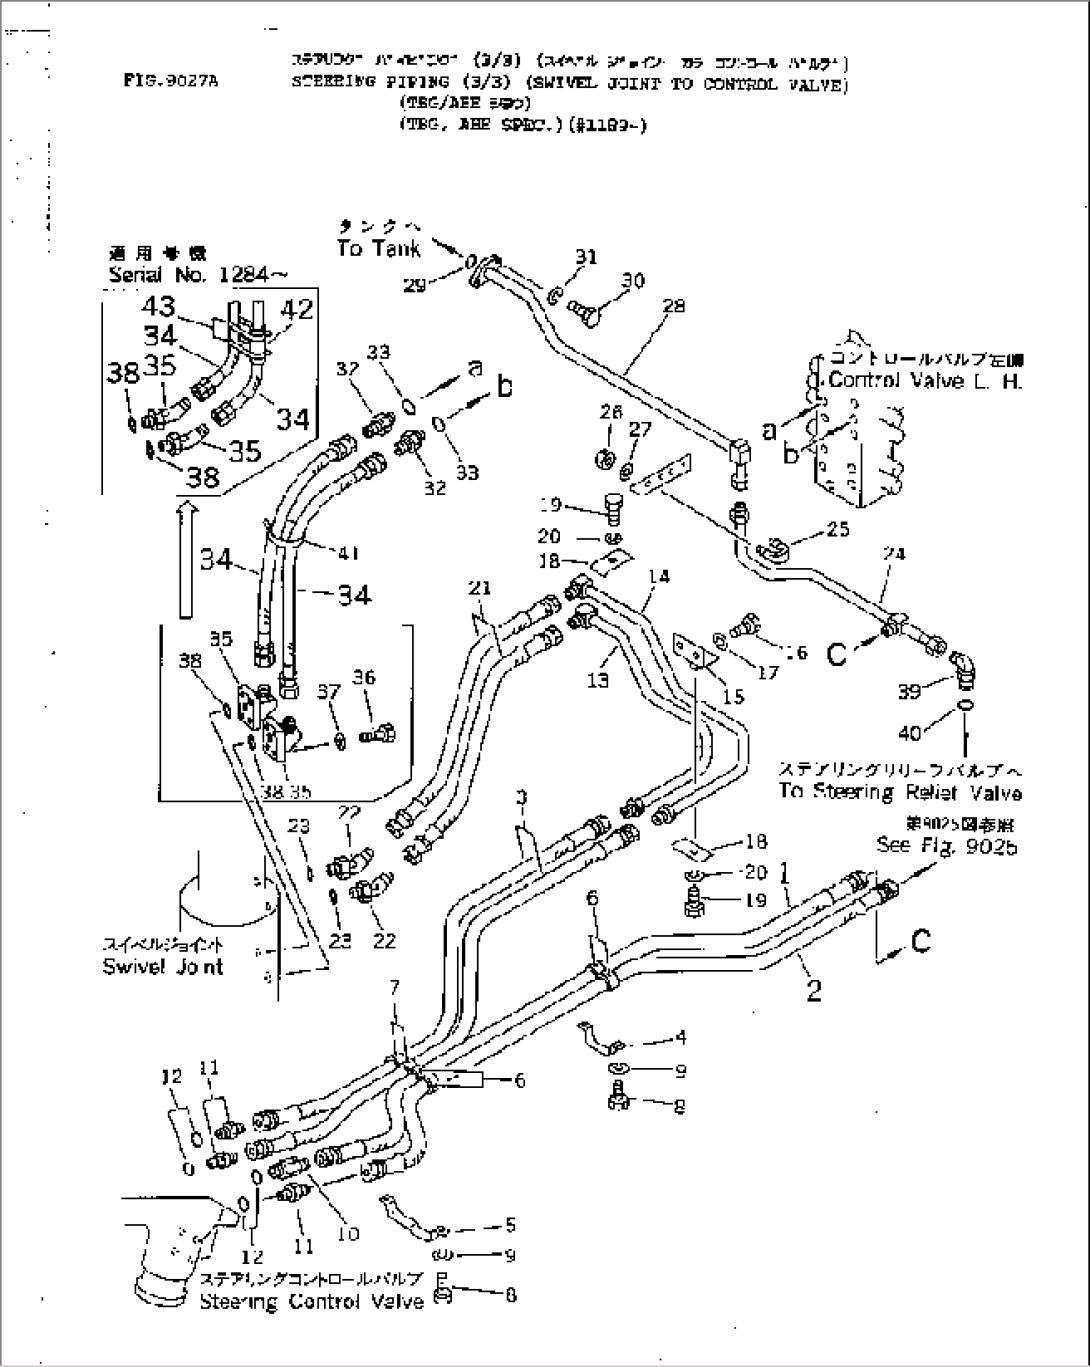 STEERING PIPING (3/3) (SWIVEL JOINT TO CONTROL VALVE) (TBG¤ ABE SPEC.)(#1189-)